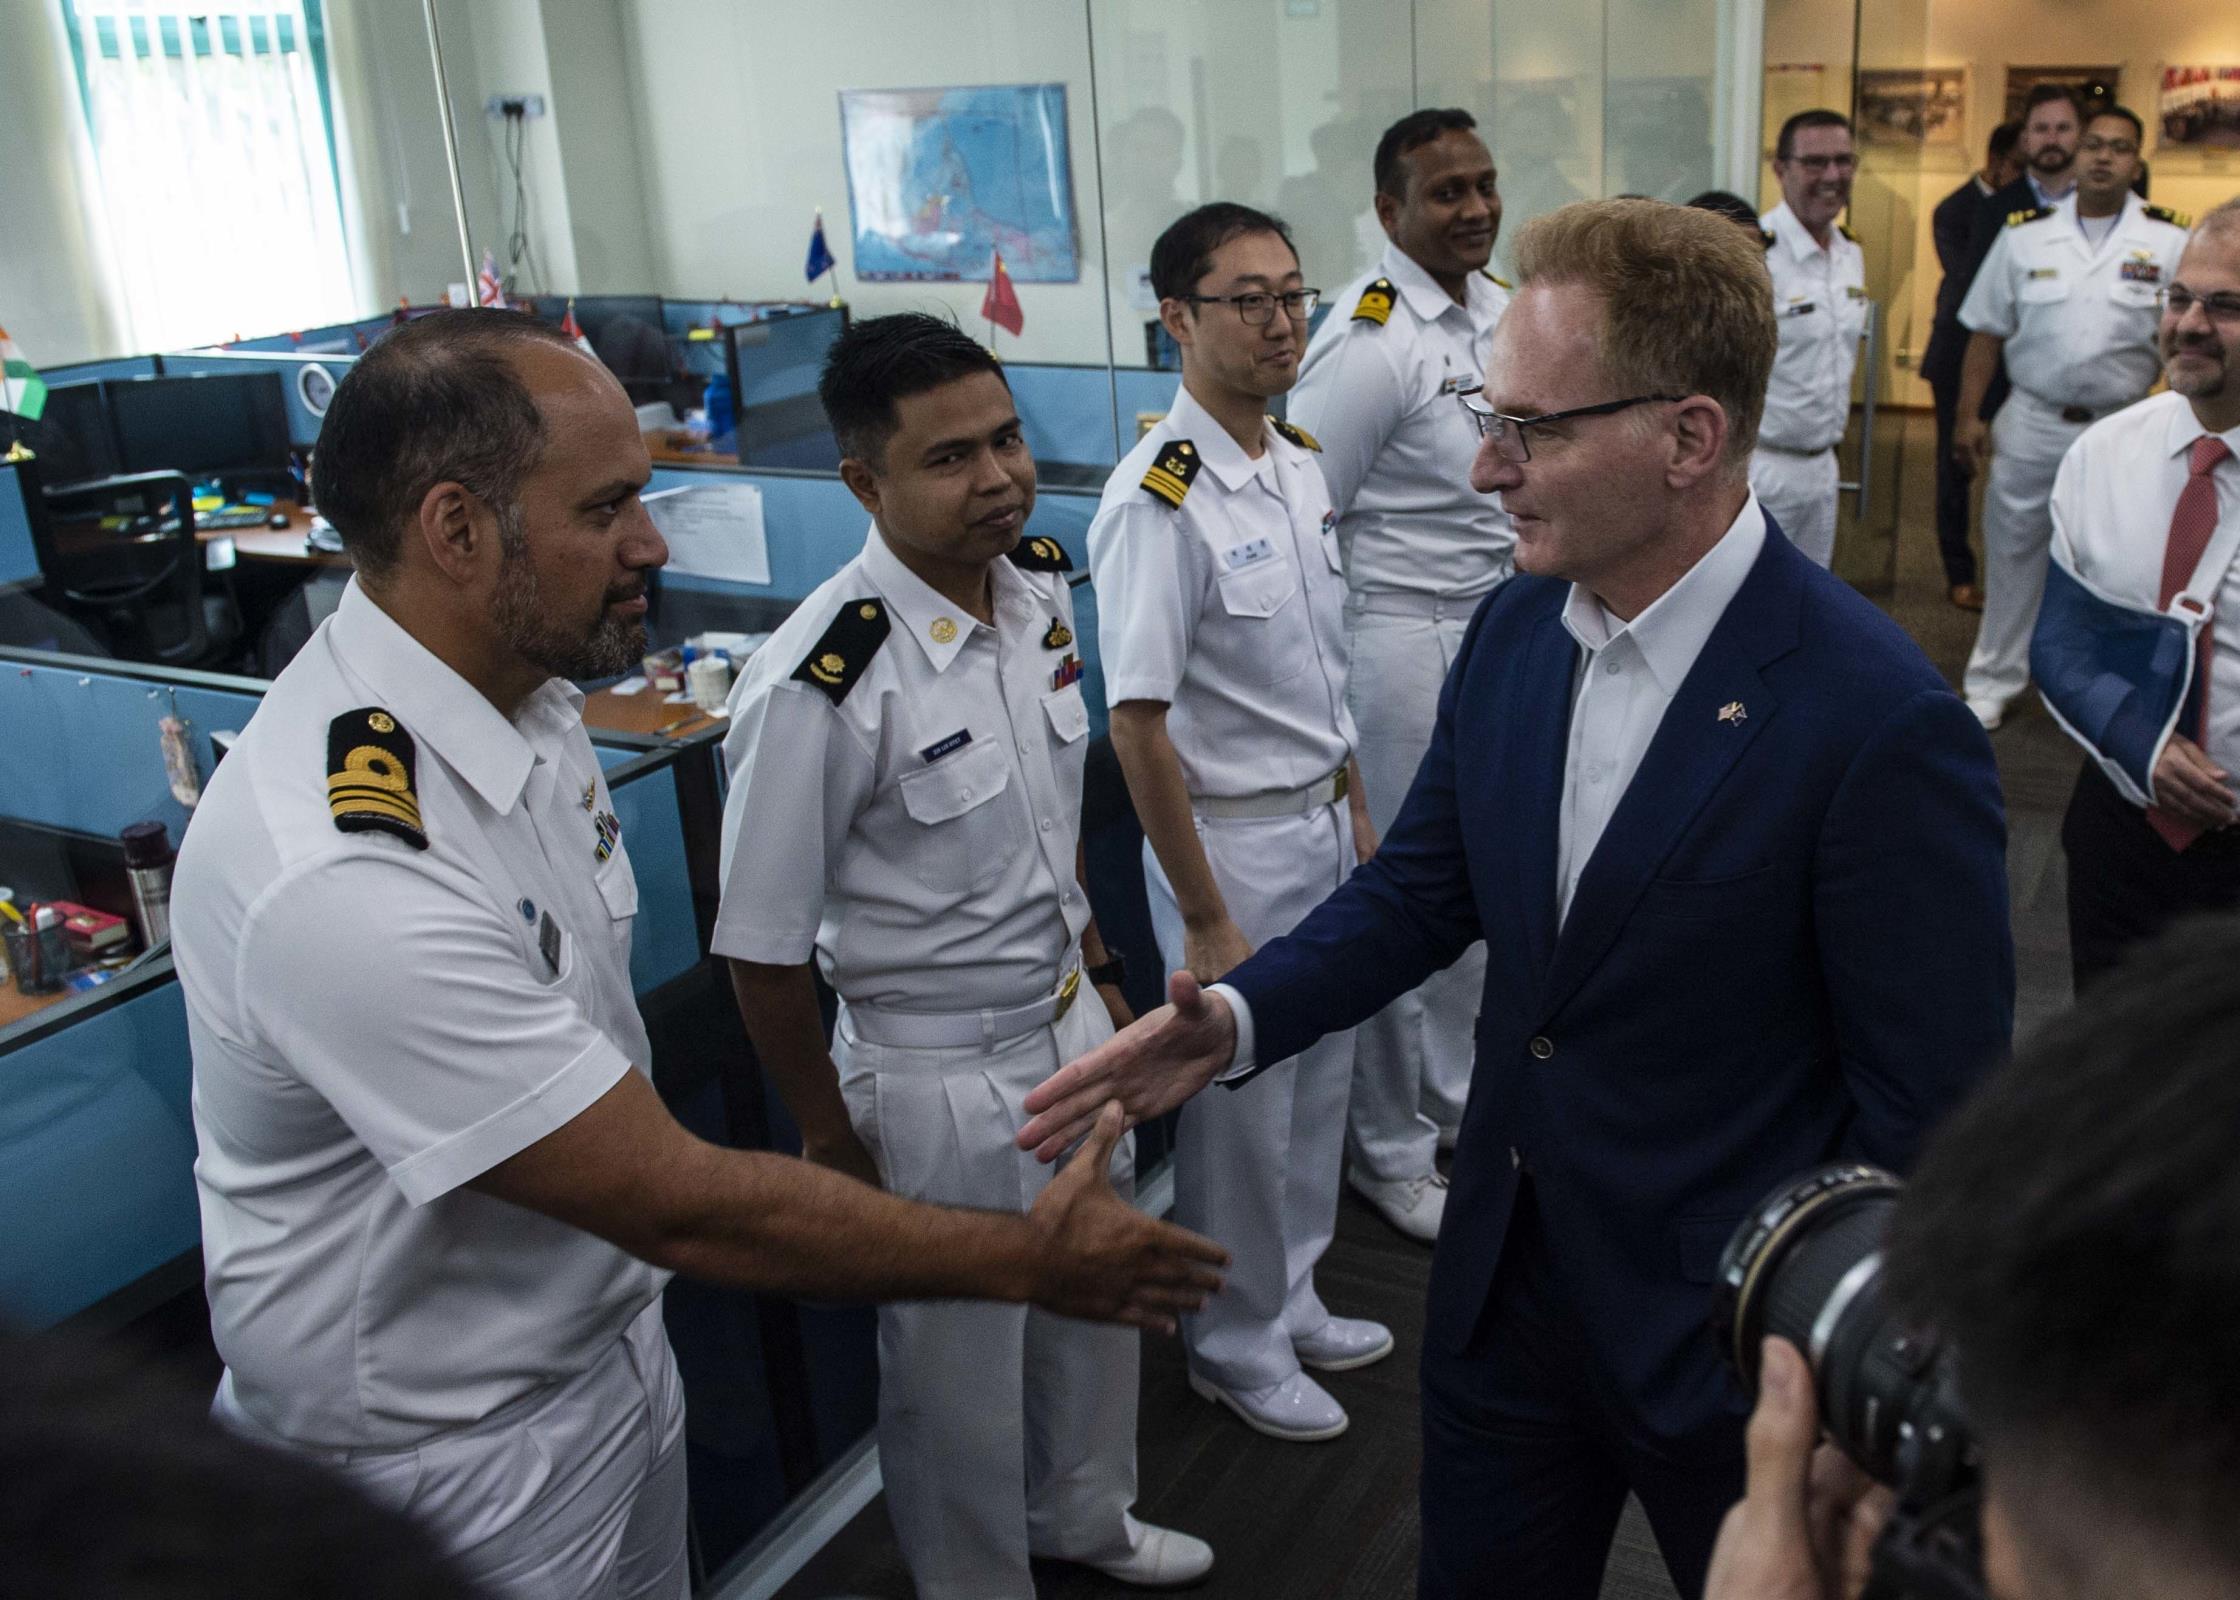 CHANGI NAVAL BASE, Singapore (Jan. 14, 2019) Acting Secretary of the Navy Thomas B. Modly meets with international liaison officers during a tour of the Information Fusion Centre. Modly’s visit to Singapore is part of a multination visit to the U.S. Indo-Pacific areas of responsibility focused on reinforcing existing partnerships and visiting Sailors and Marines providing forward presence. (U.S. Navy photo by Mass Communication Specialist 2nd Class Christopher Veloicaza/Released)200114-N-FV739-037